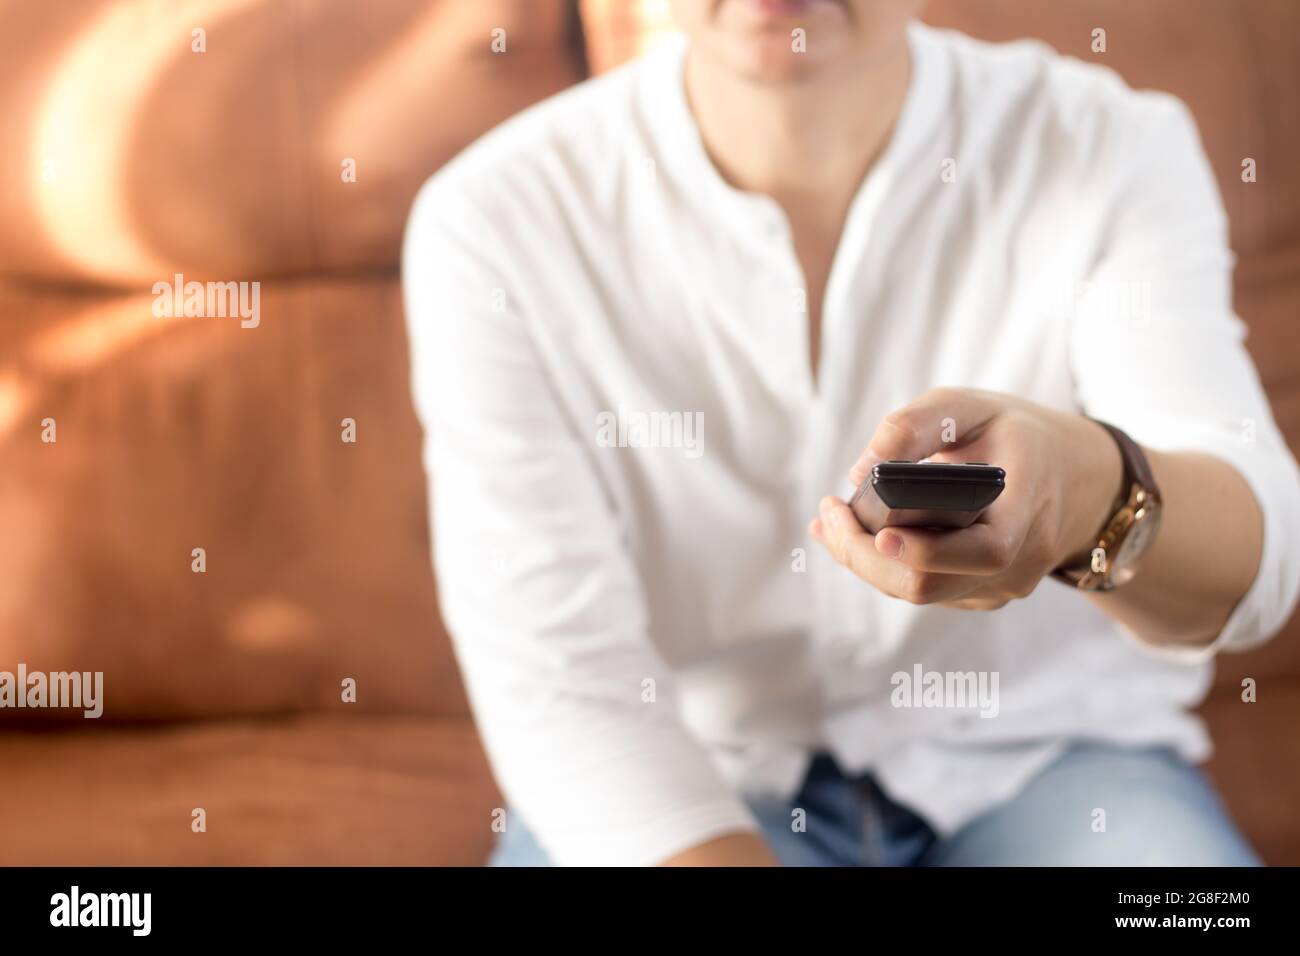 Young man sitting on sofa, holding remote control Stock Photo